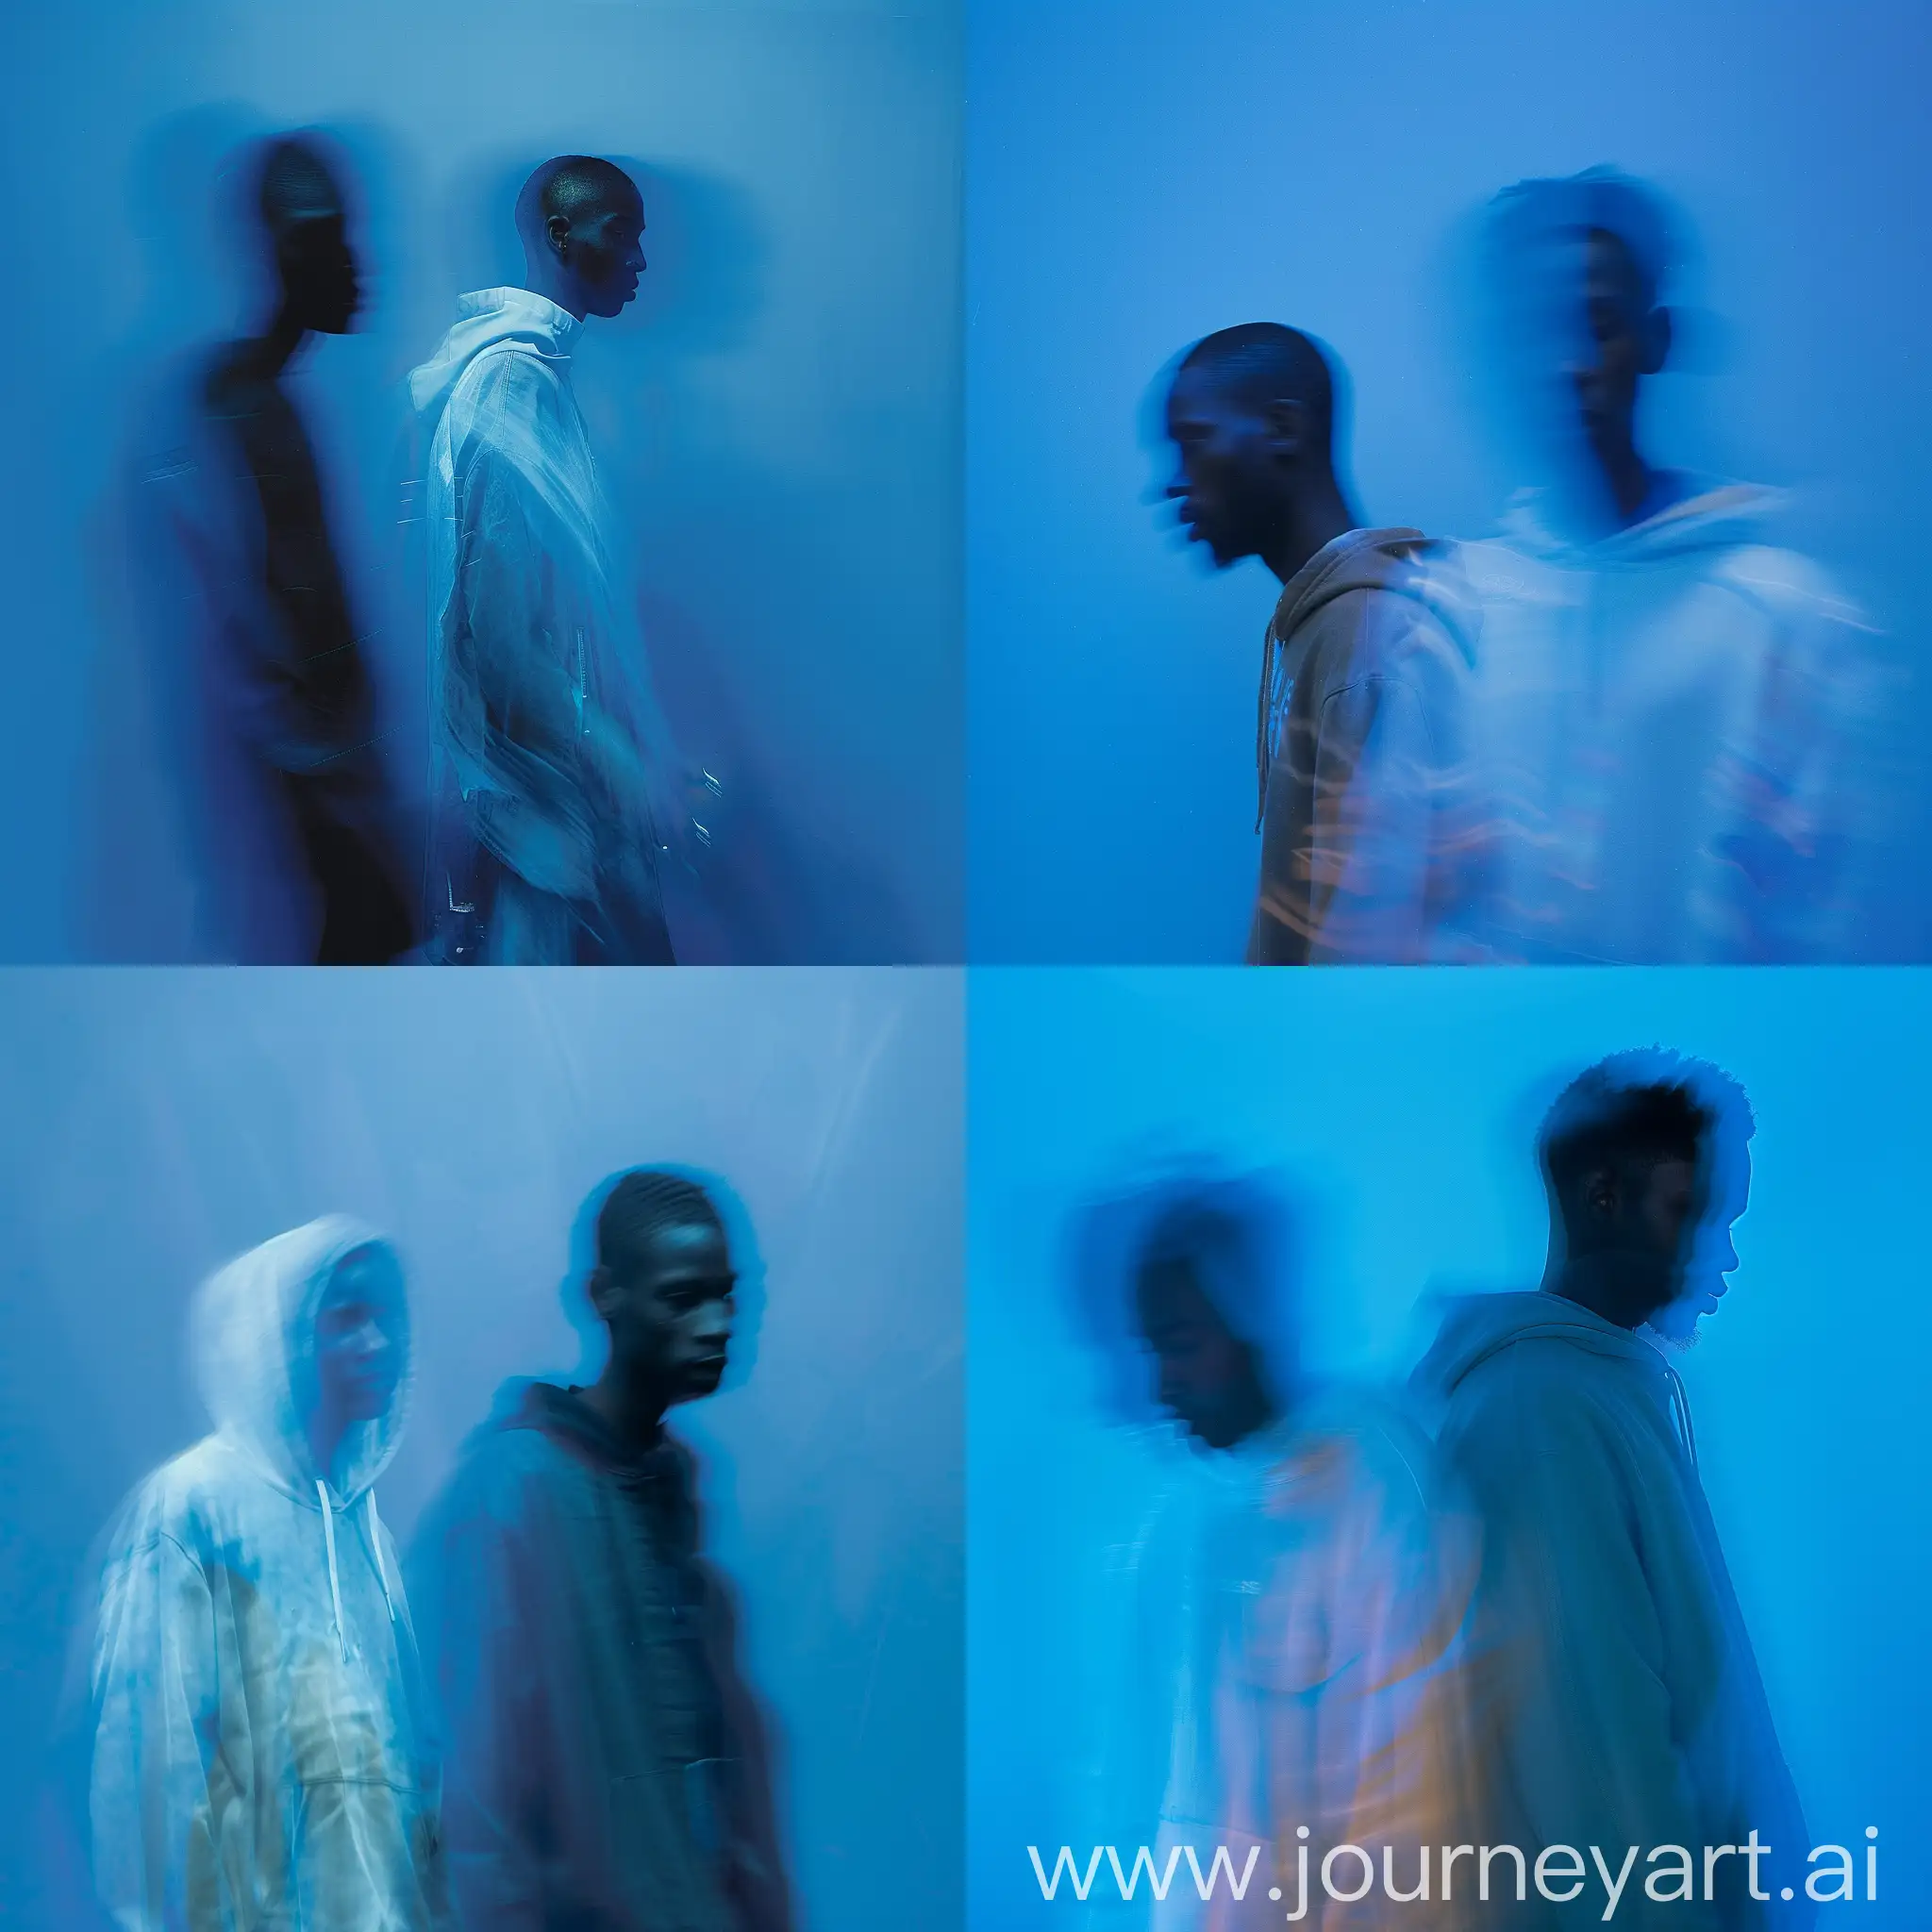 Ethereal-Figures-in-Motion-Blur-Against-Blue-Background